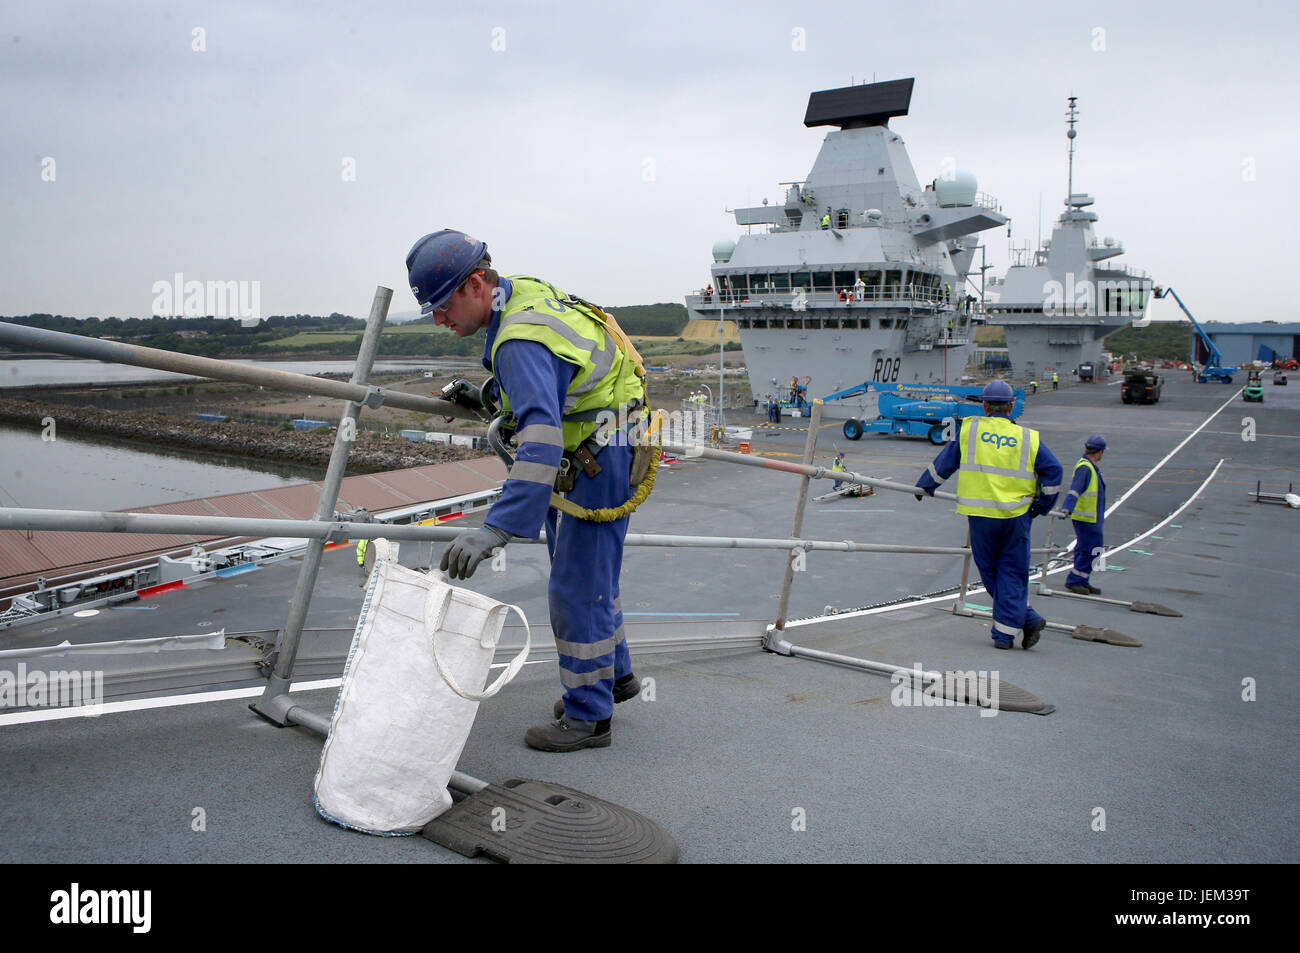 Final preparations are made by engineers and crew on the flight deck ahead of sea trials this summer, for the Royal Navy's new aircraft carrier HMS Queen Elizabeth, at Rosyth Dockyard in Dunfermline. Stock Photo